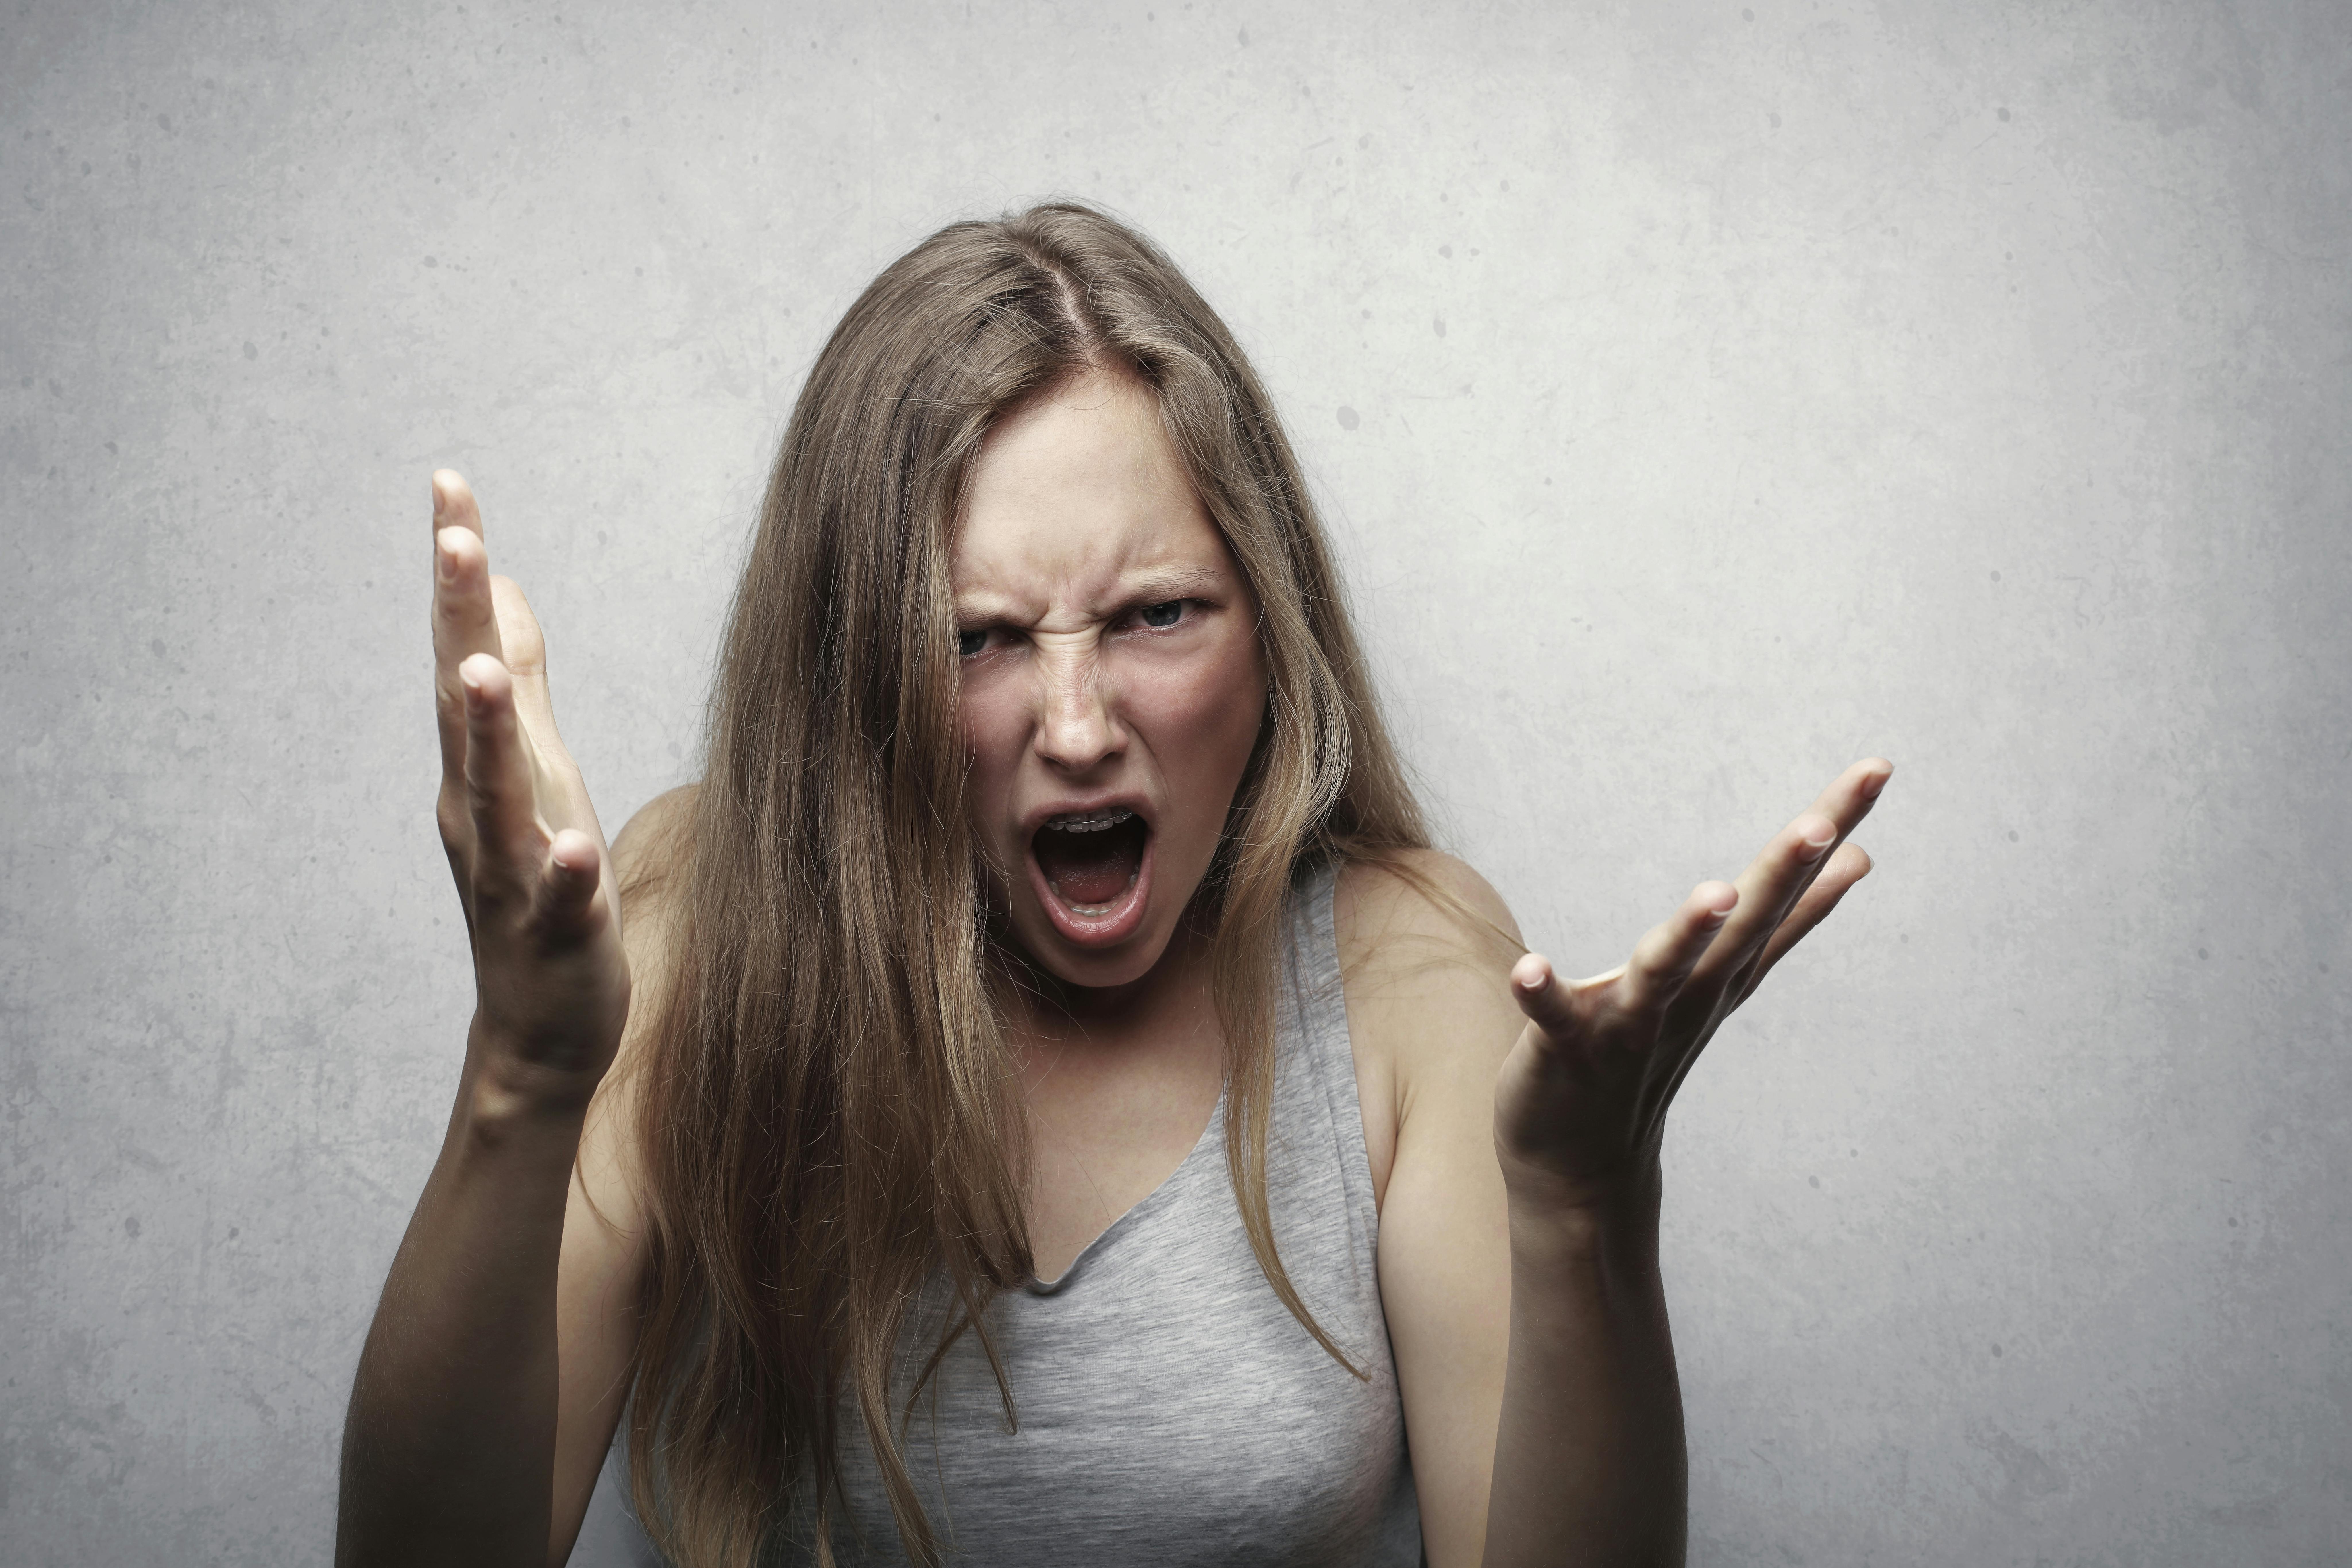 Angry woman in gray tank top. | Photo: Pexels